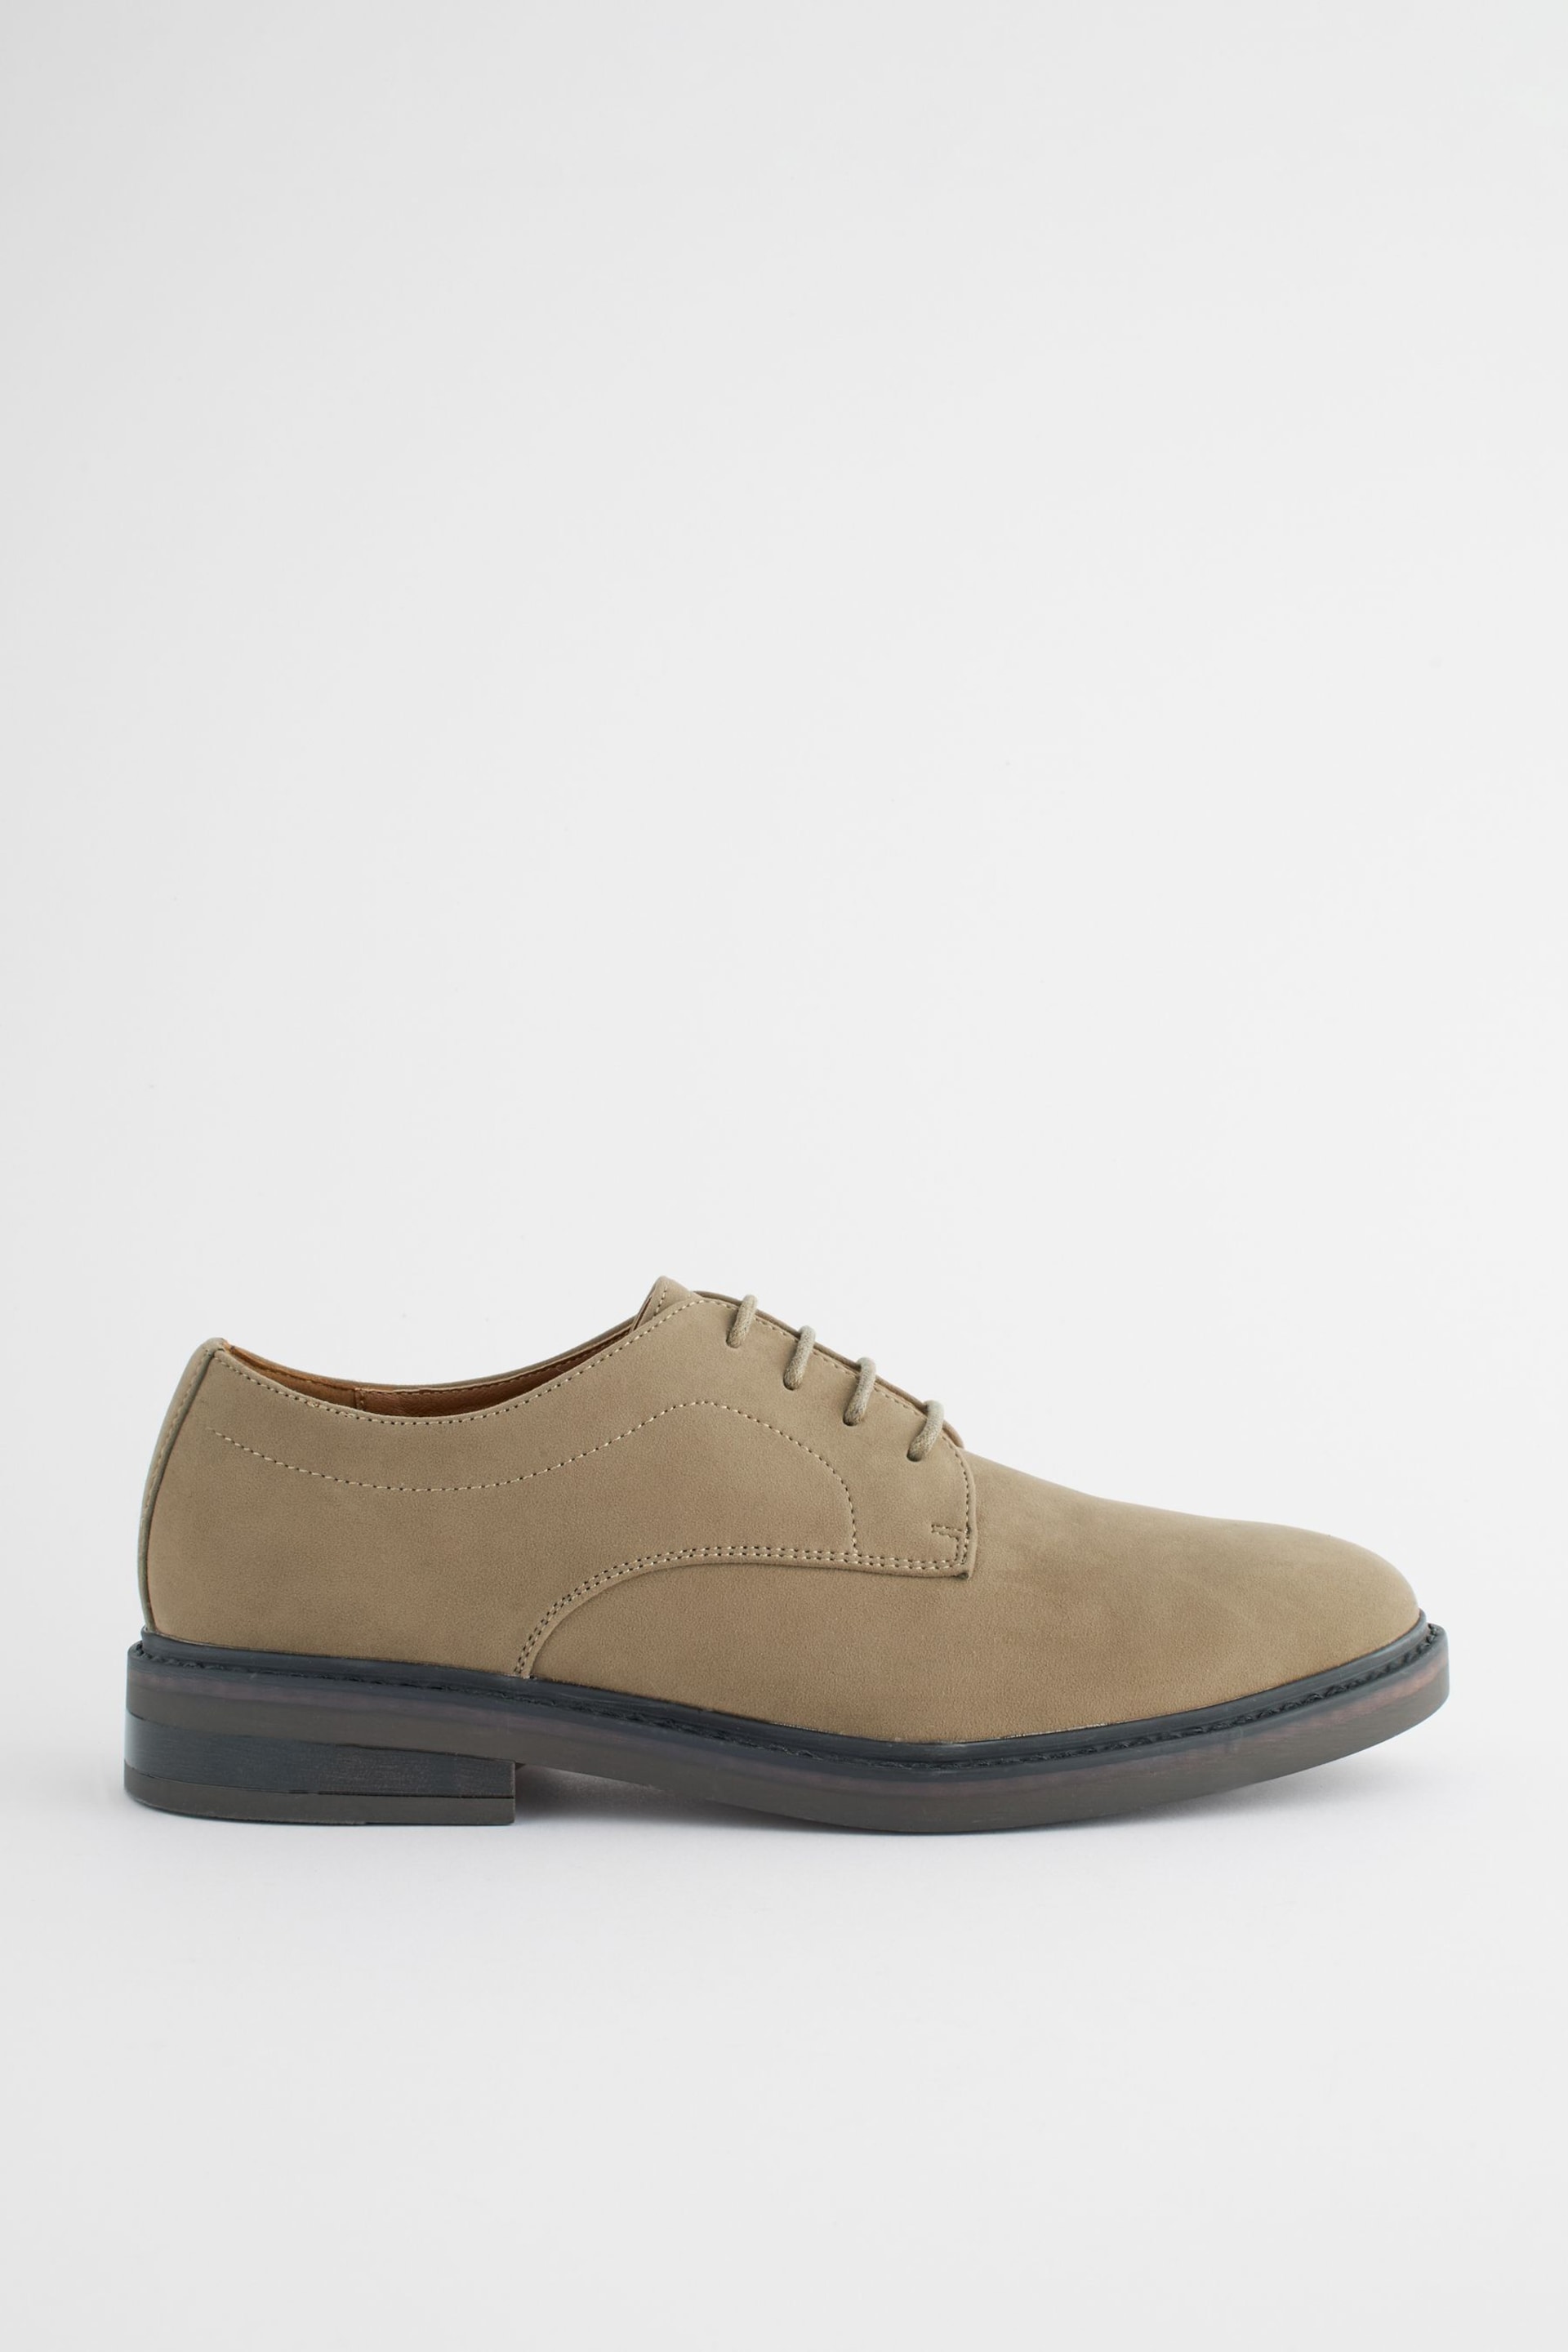 Stone Chunky Sole Derby Shoes - Image 3 of 7